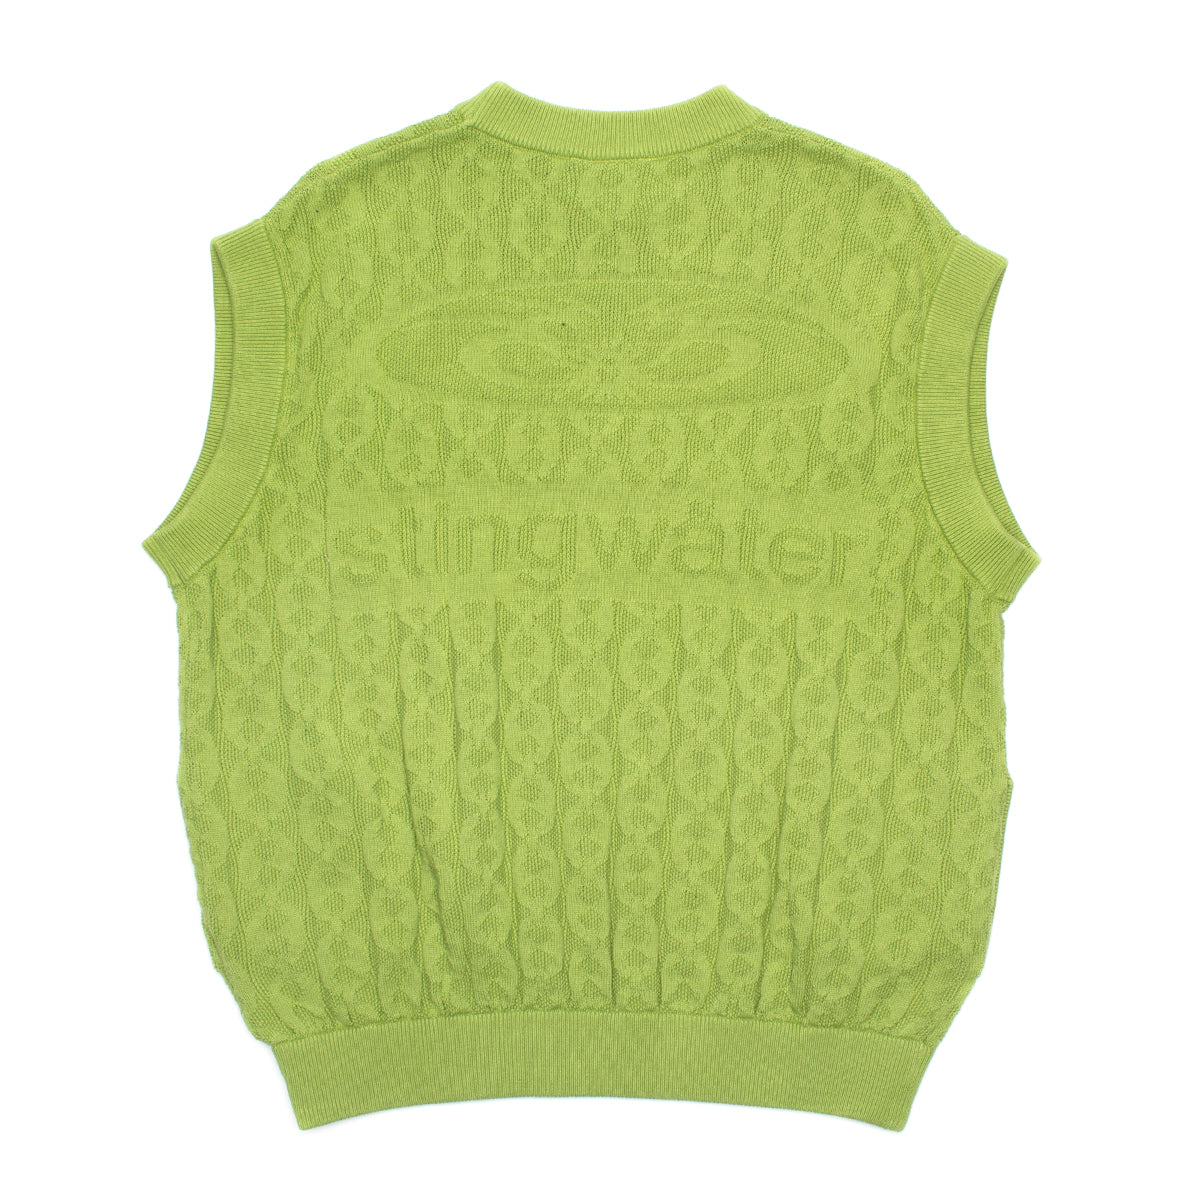 Stingwater | Moses Chain Knit Sweater Vest Color : Green